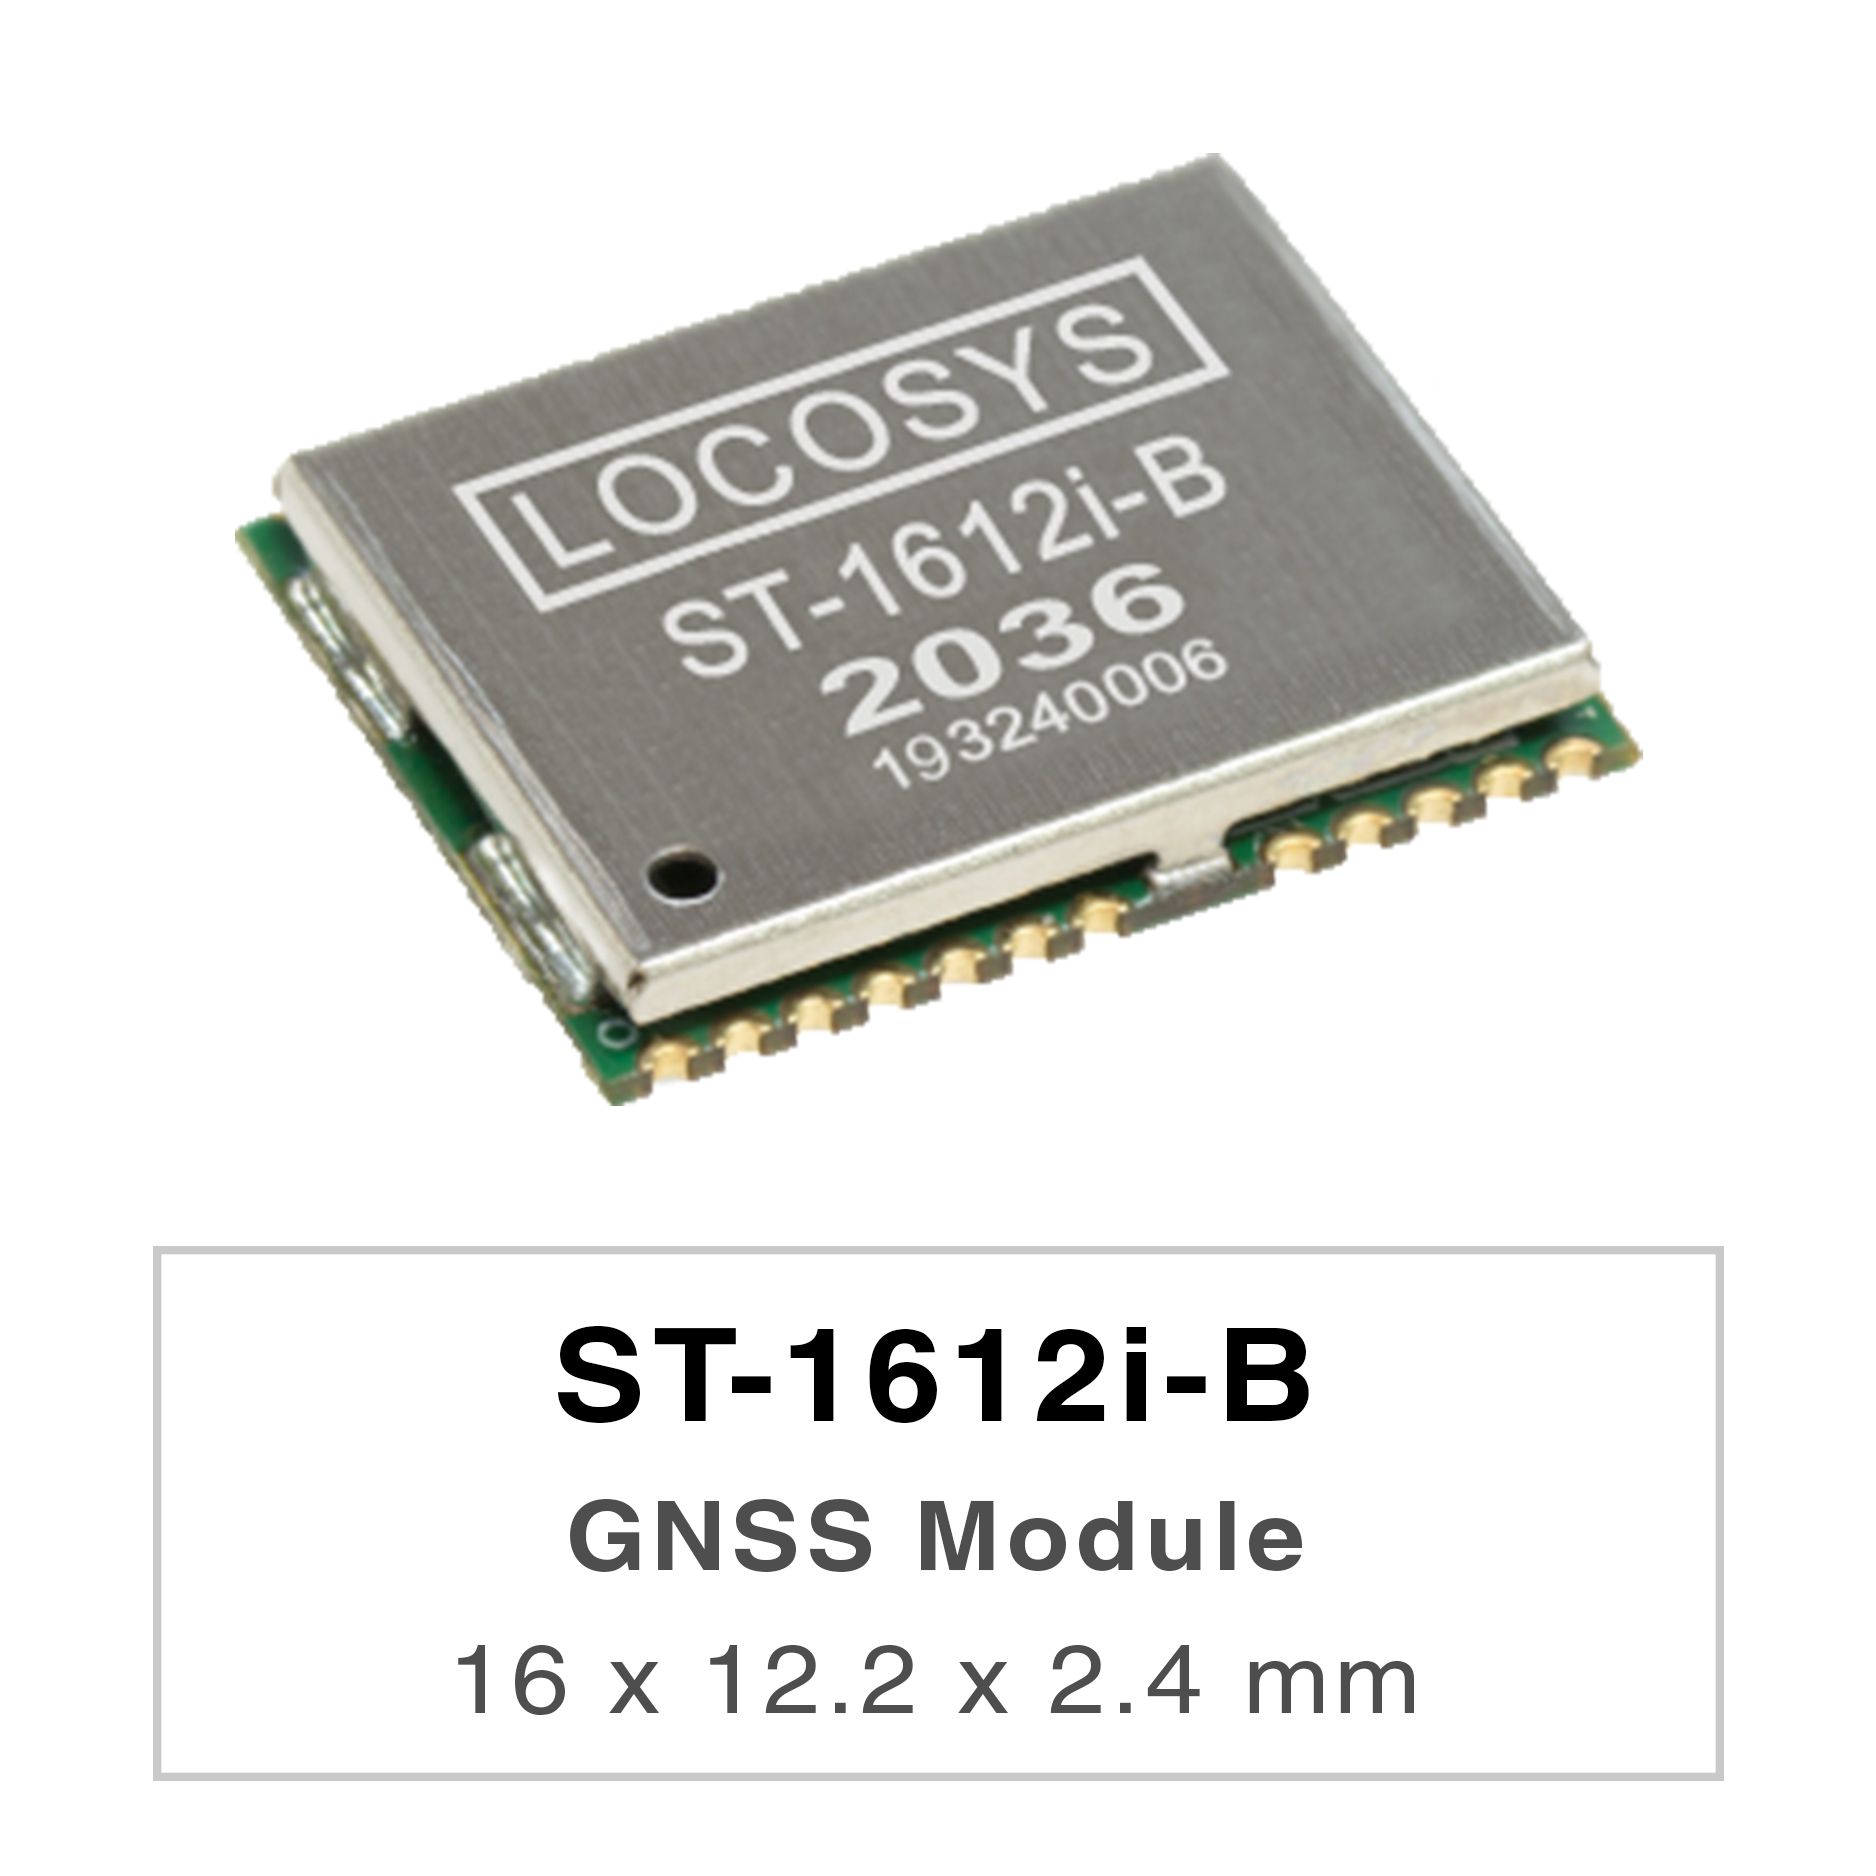 LOCOSYS ST-1612i-B module can simultaneously acquire and track multiple satellite constellations that
include GPS, BEIDOU, GALILEO and QZSS. It features high sensitivity, low power and small form factor.